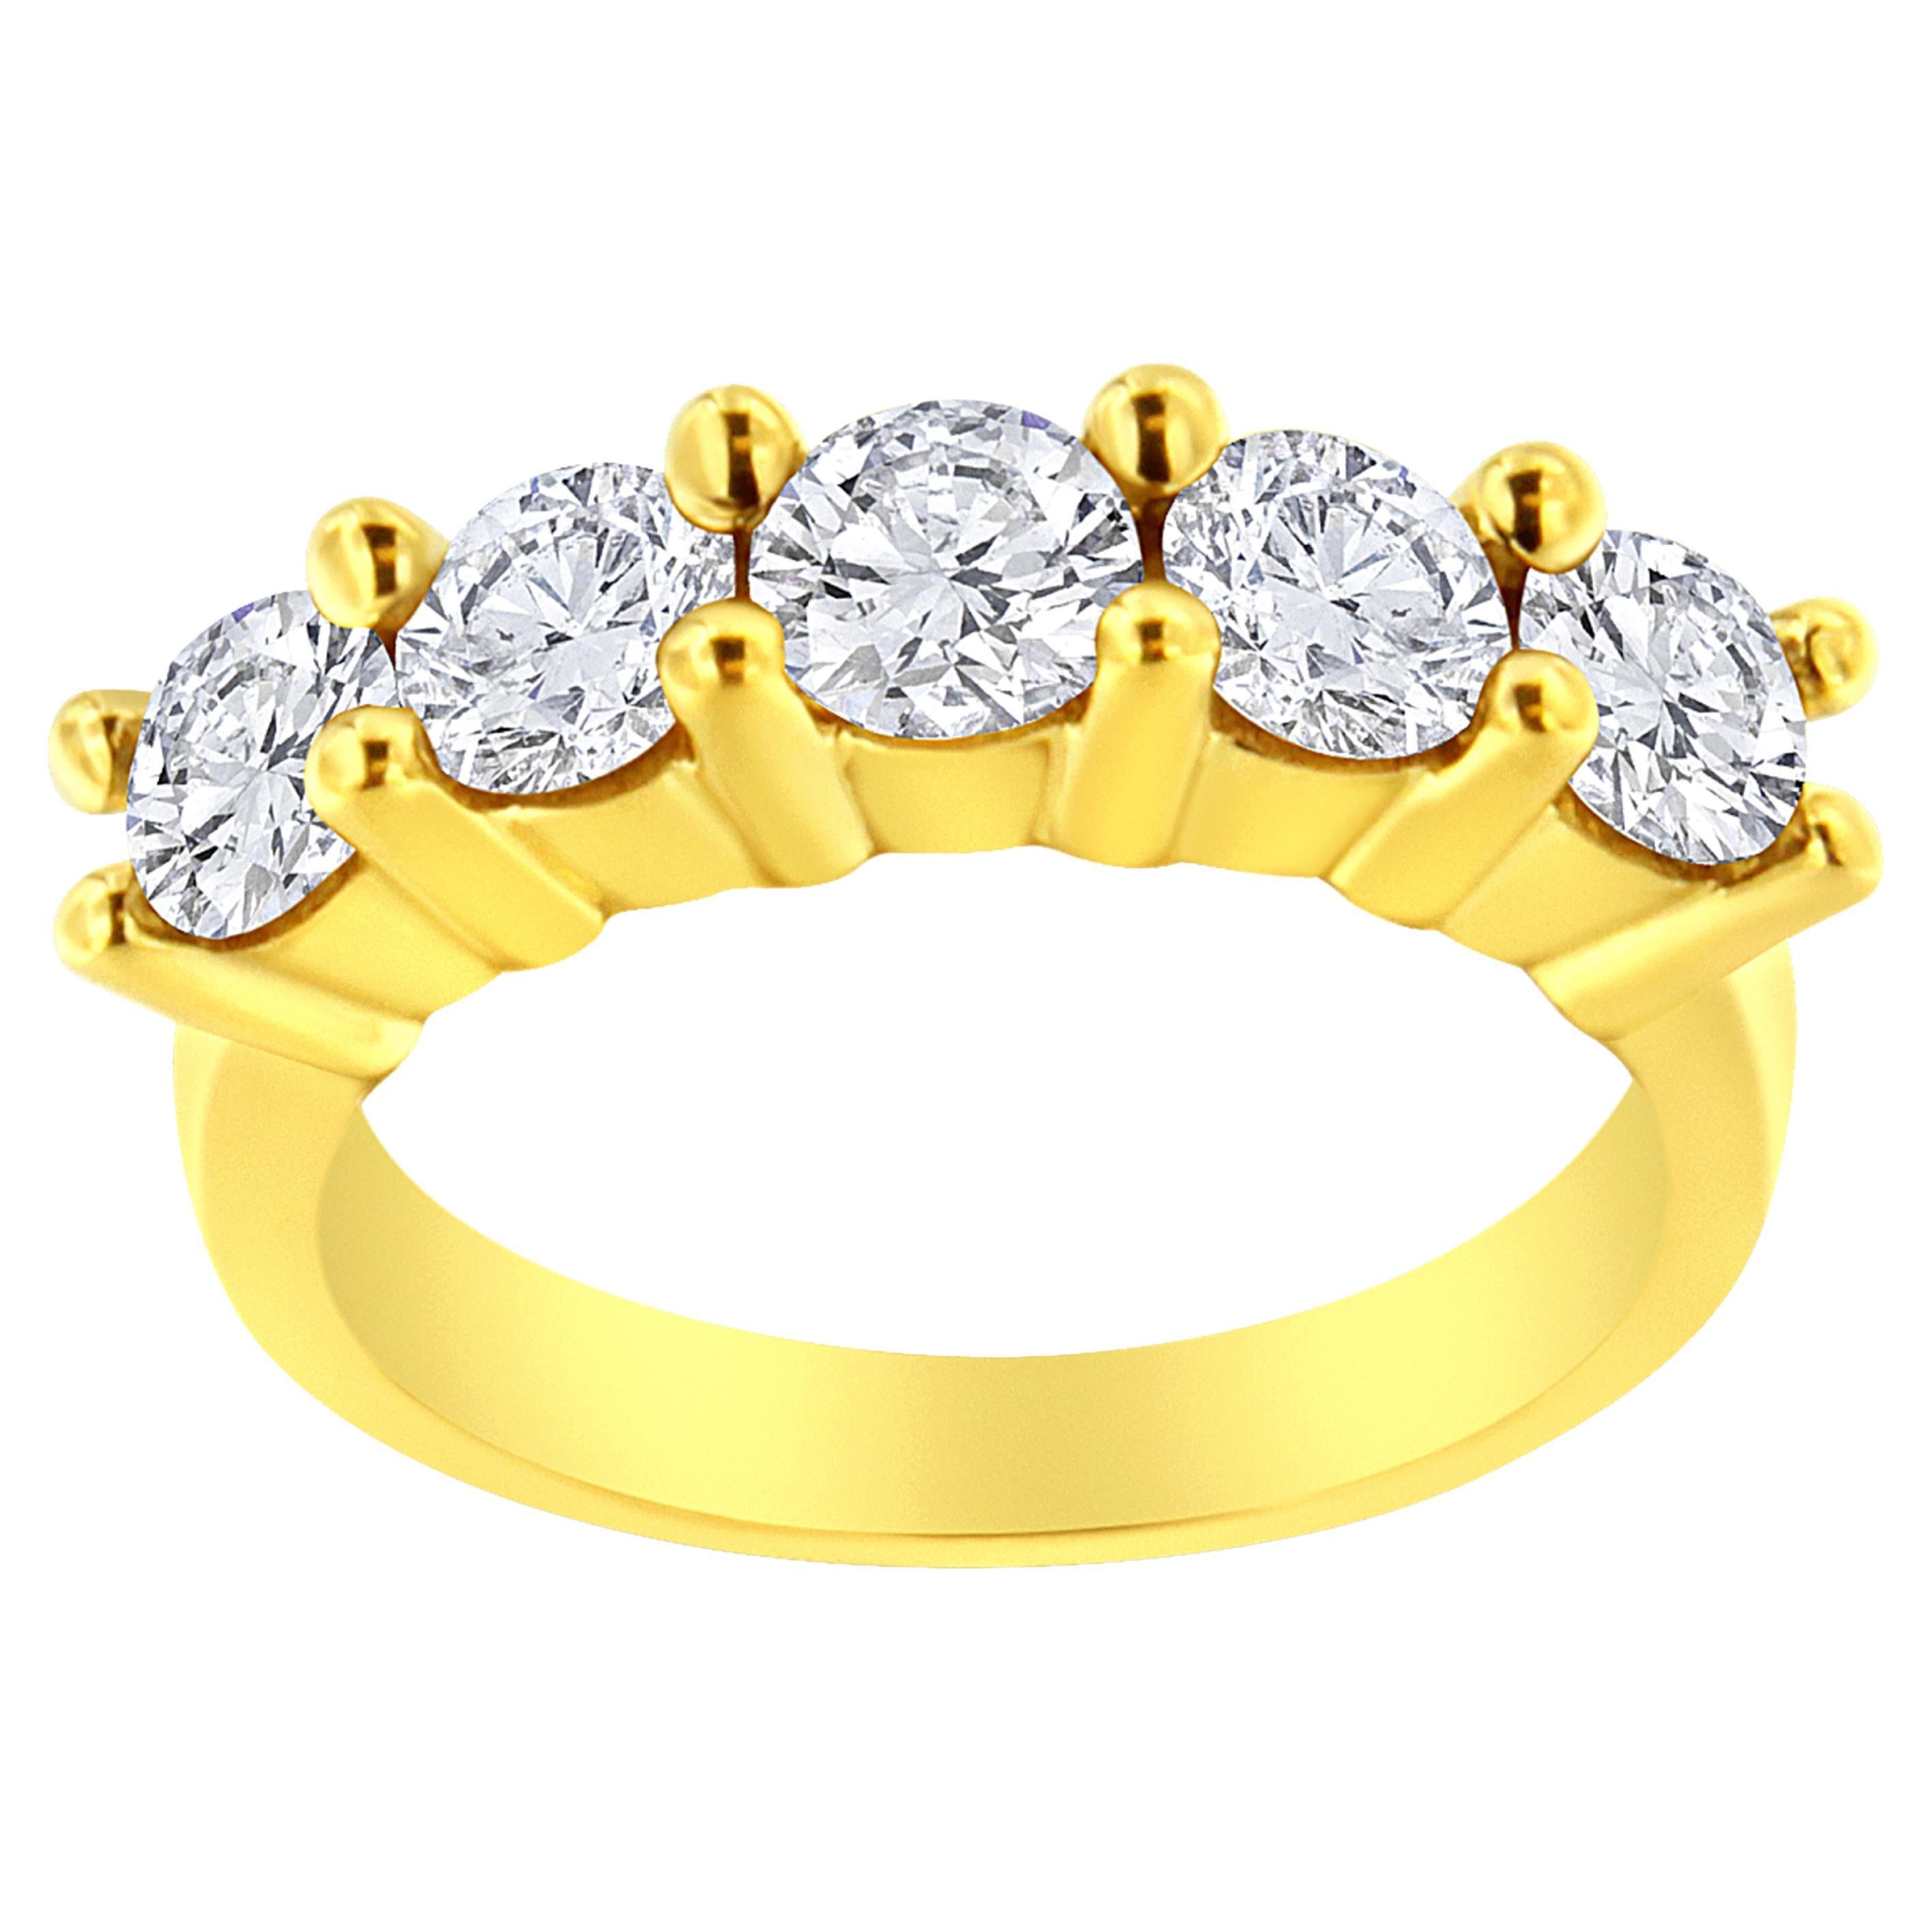 For Sale:  Yellow Gold Plated Sterling Silver 2.0 Carat Diamond 5 Stone Wedding Band Ring